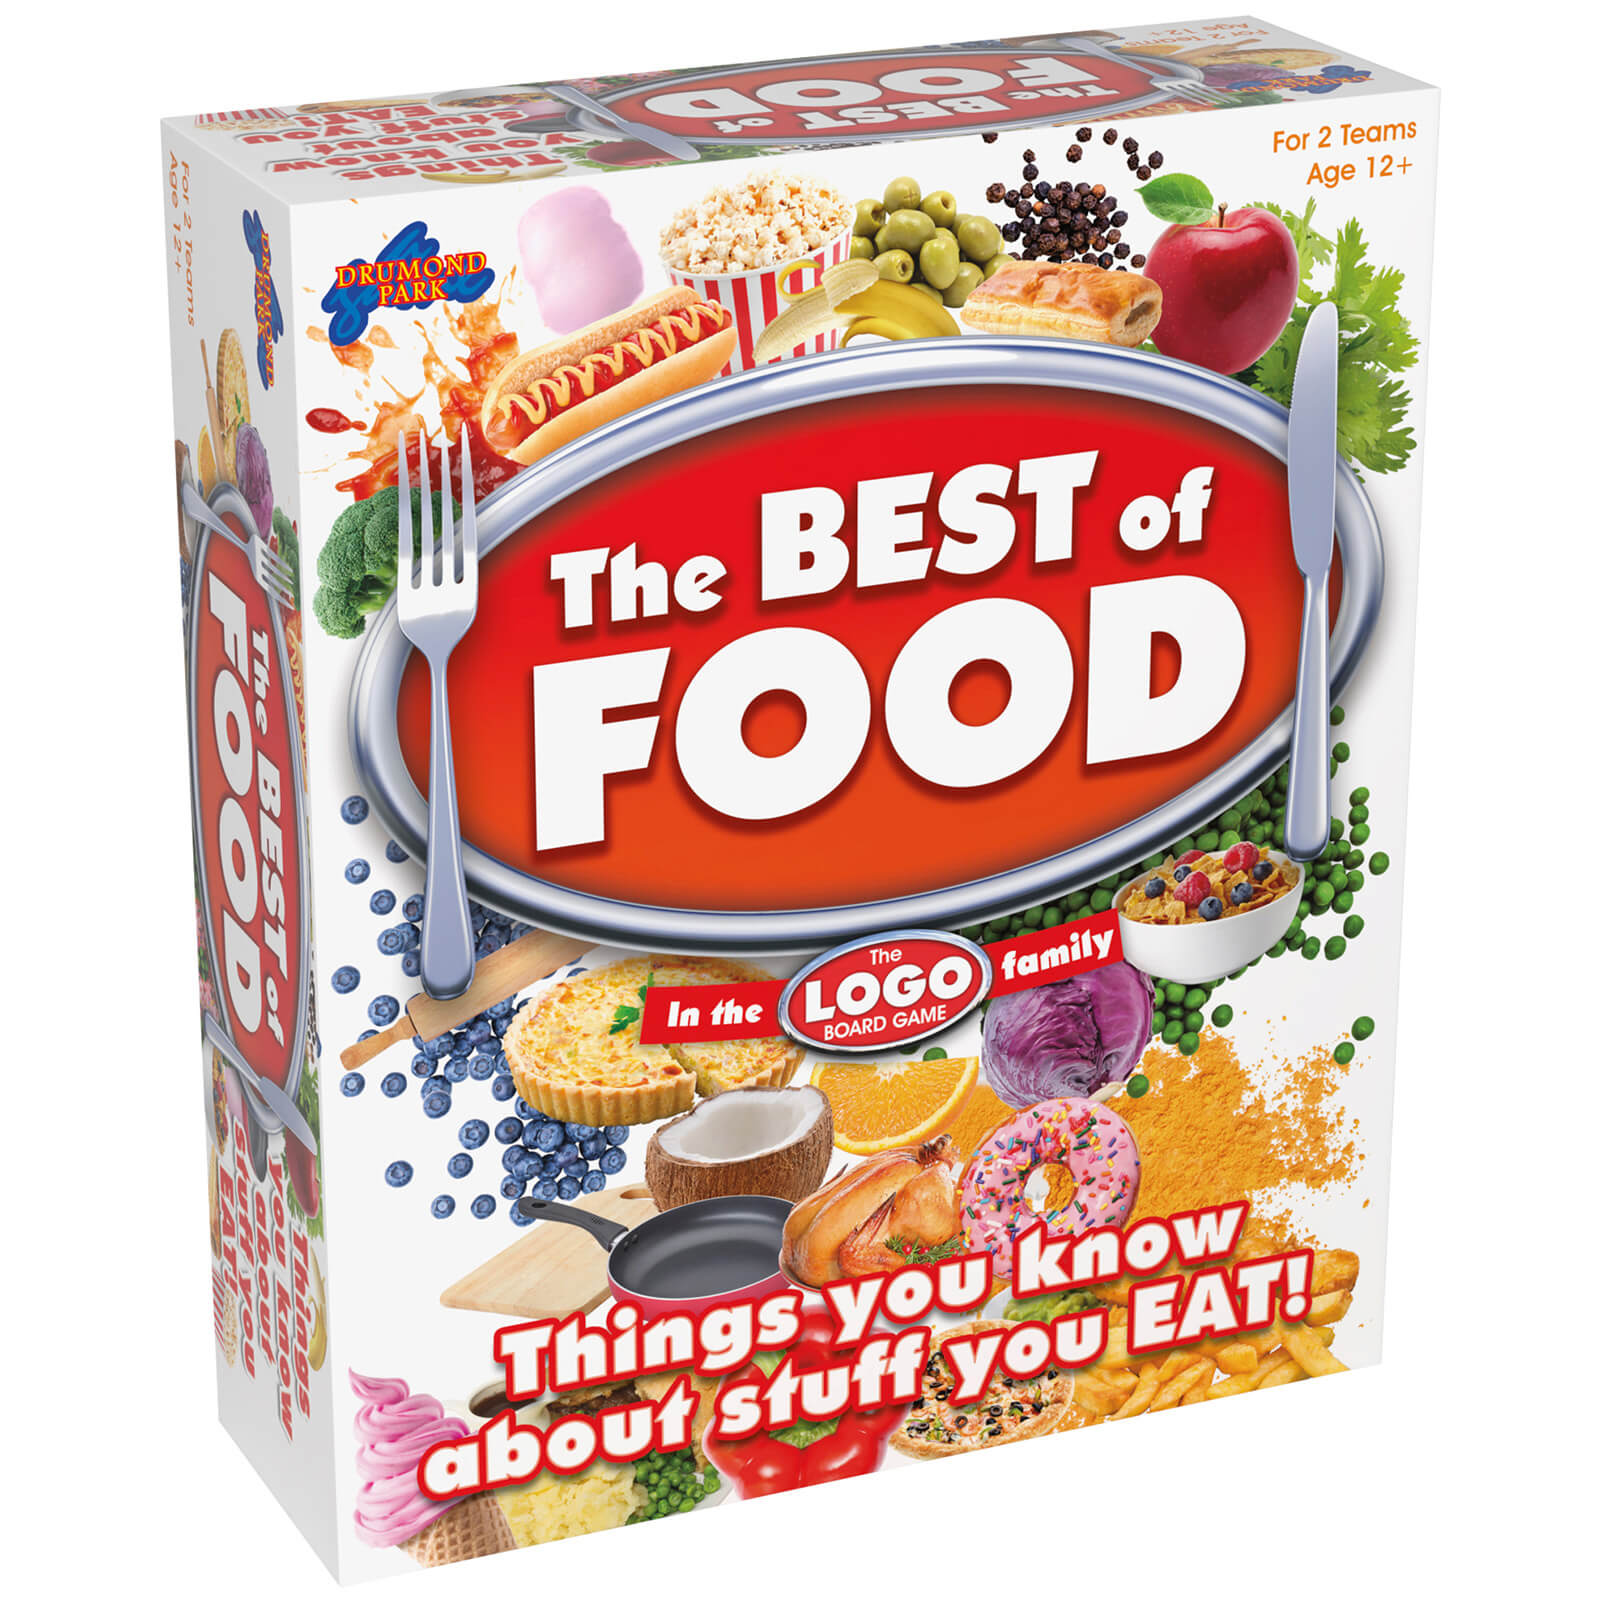 LOGO Board Game - The Best of Food